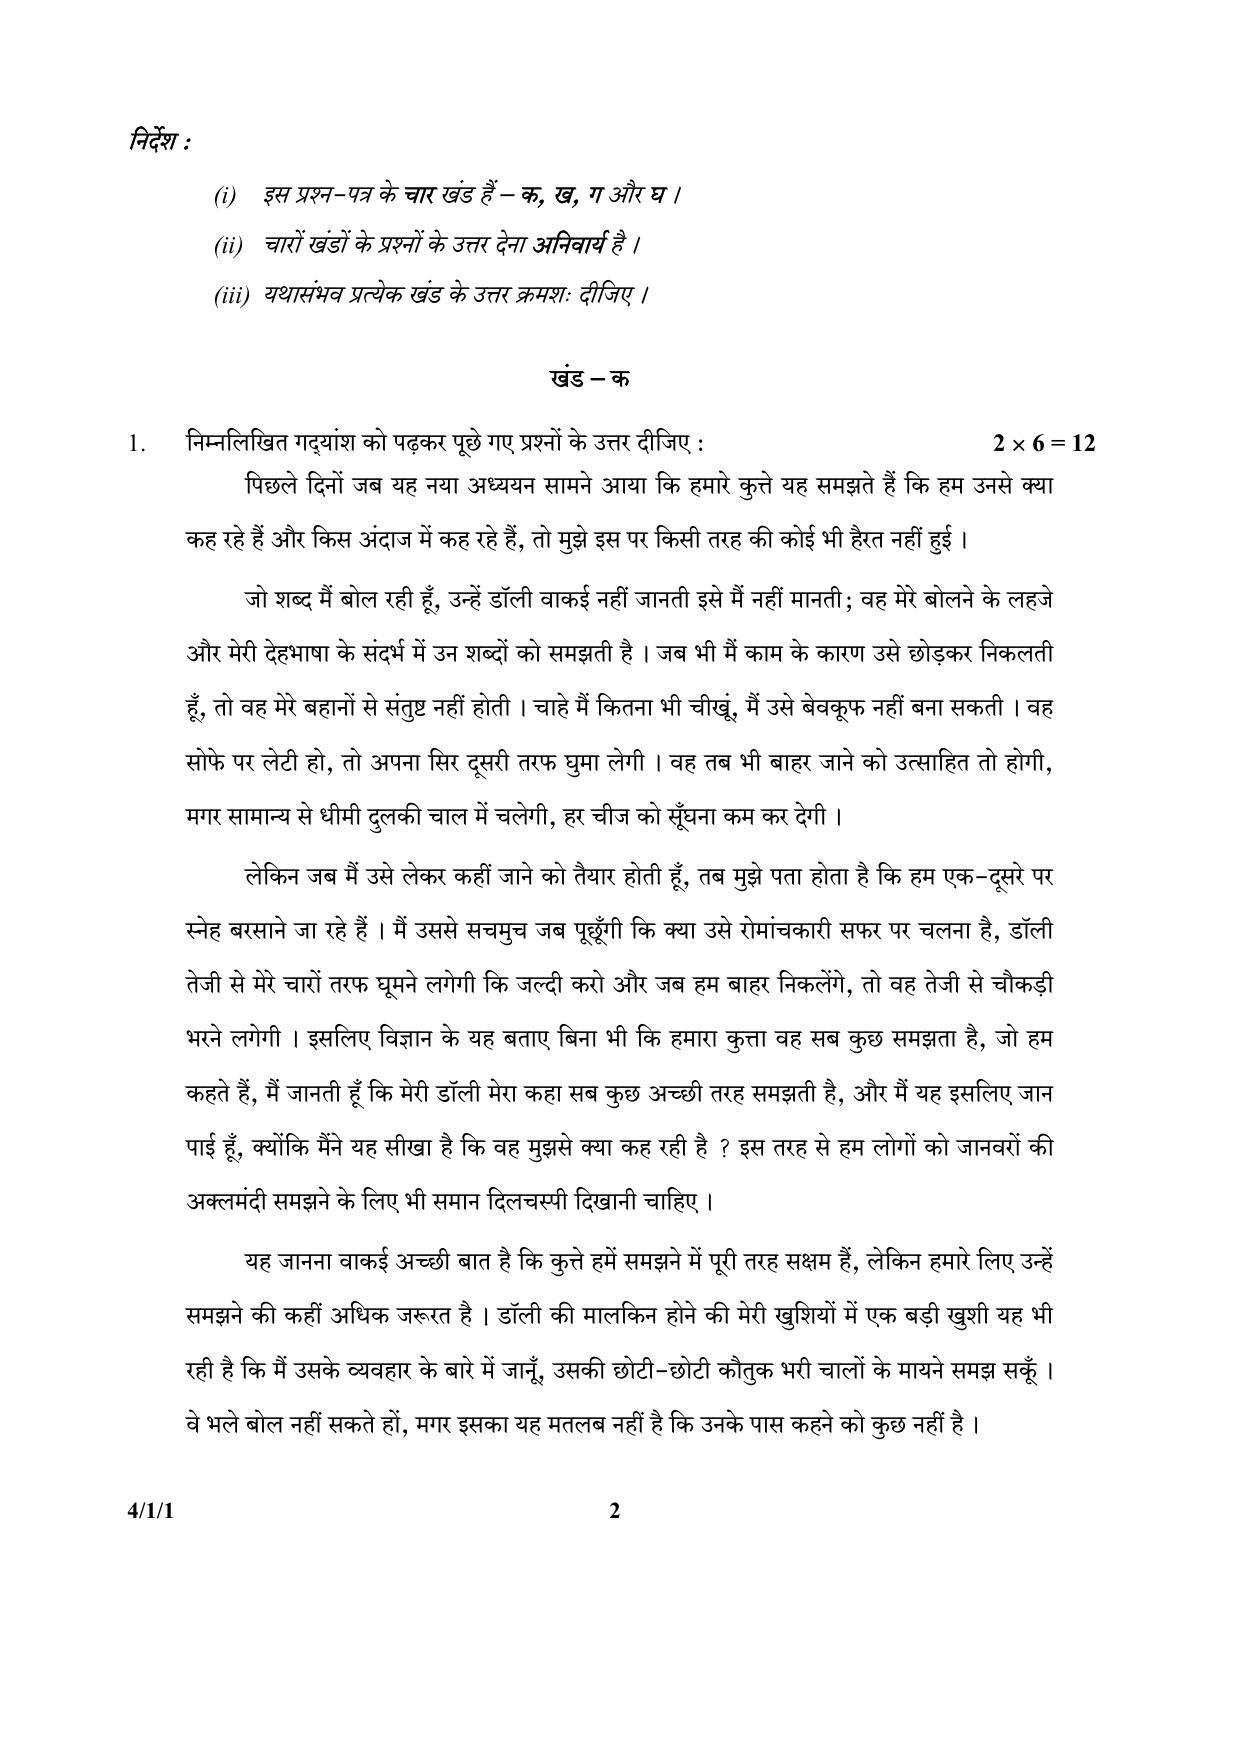 CBSE Class 10 4-1-1_Hindi 2017-comptt Question Paper - Page 2